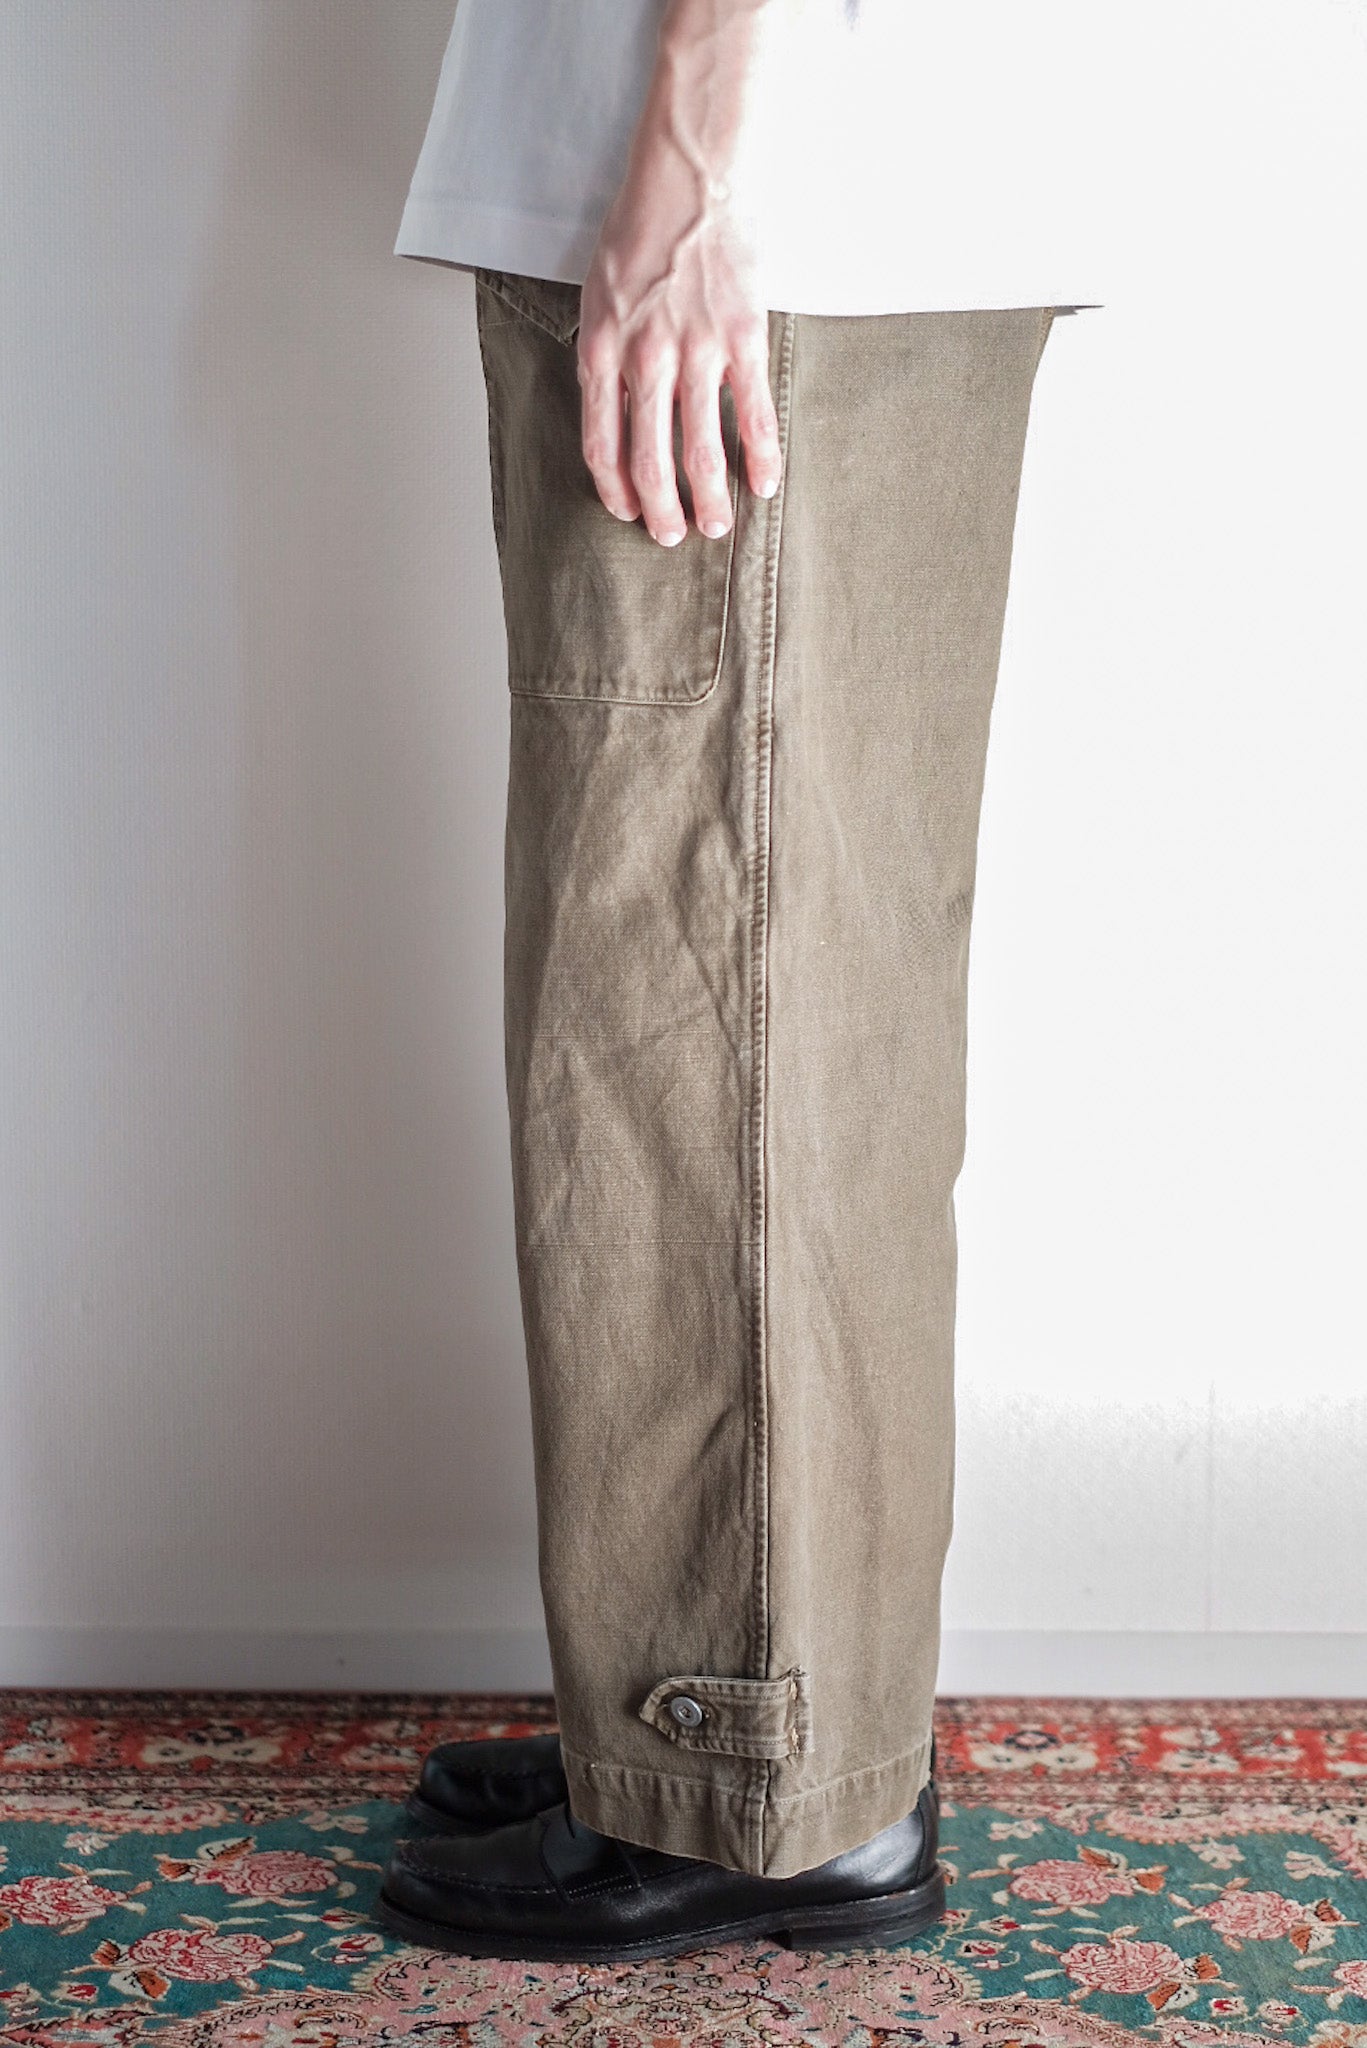 [~ 40's] French Army M44 Field Trousers Size.84XC